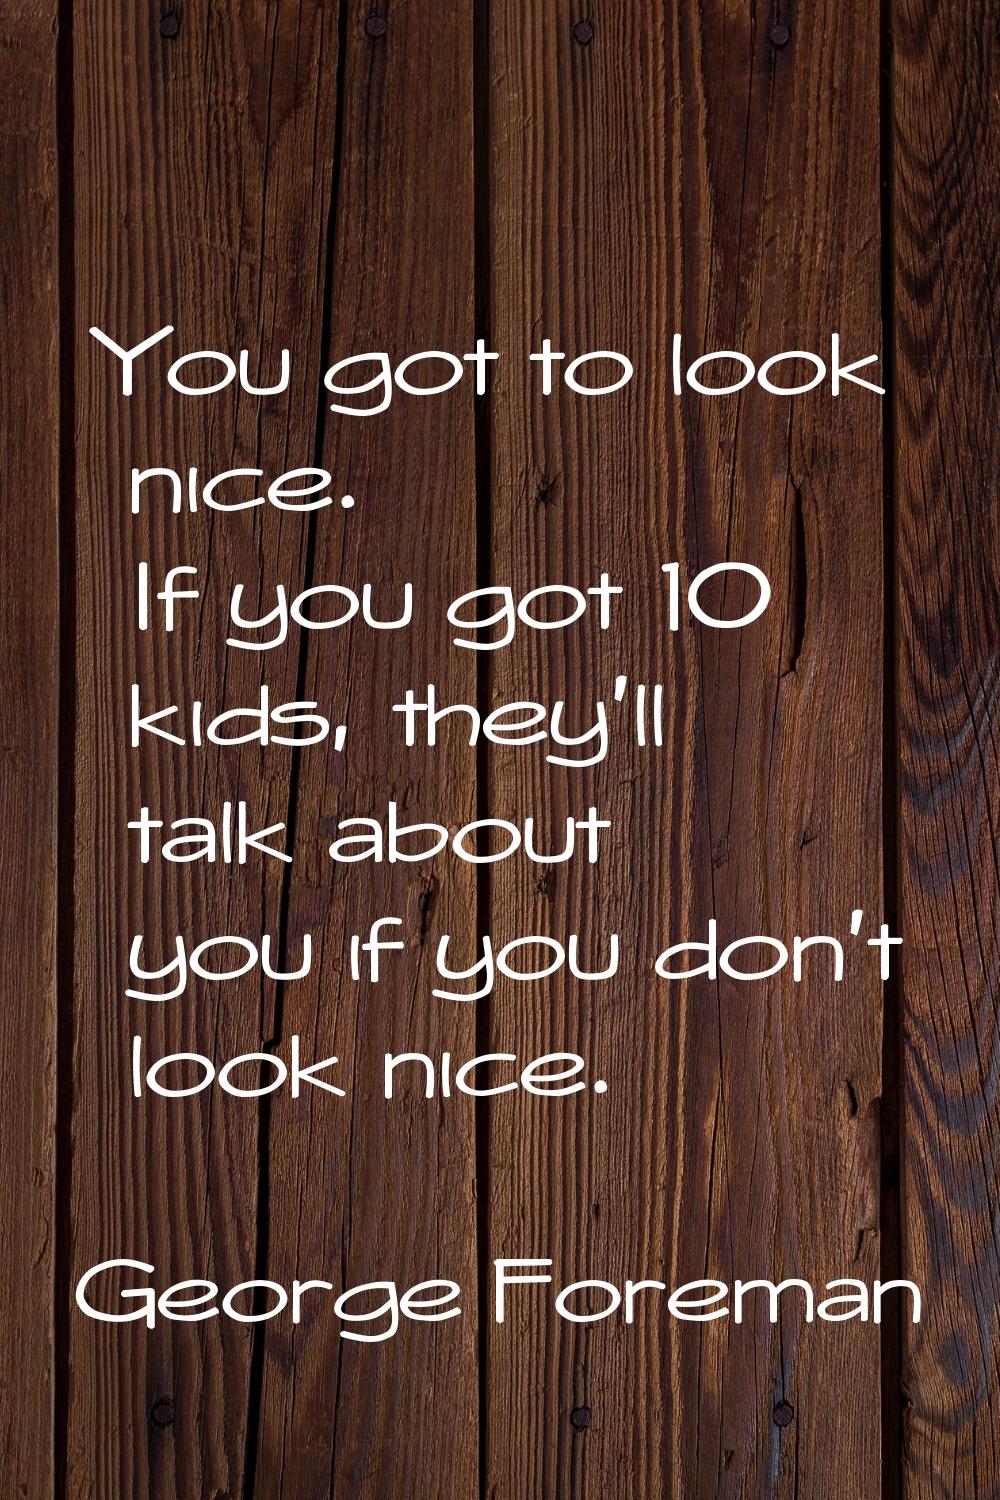 You got to look nice. If you got 10 kids, they'll talk about you if you don't look nice.